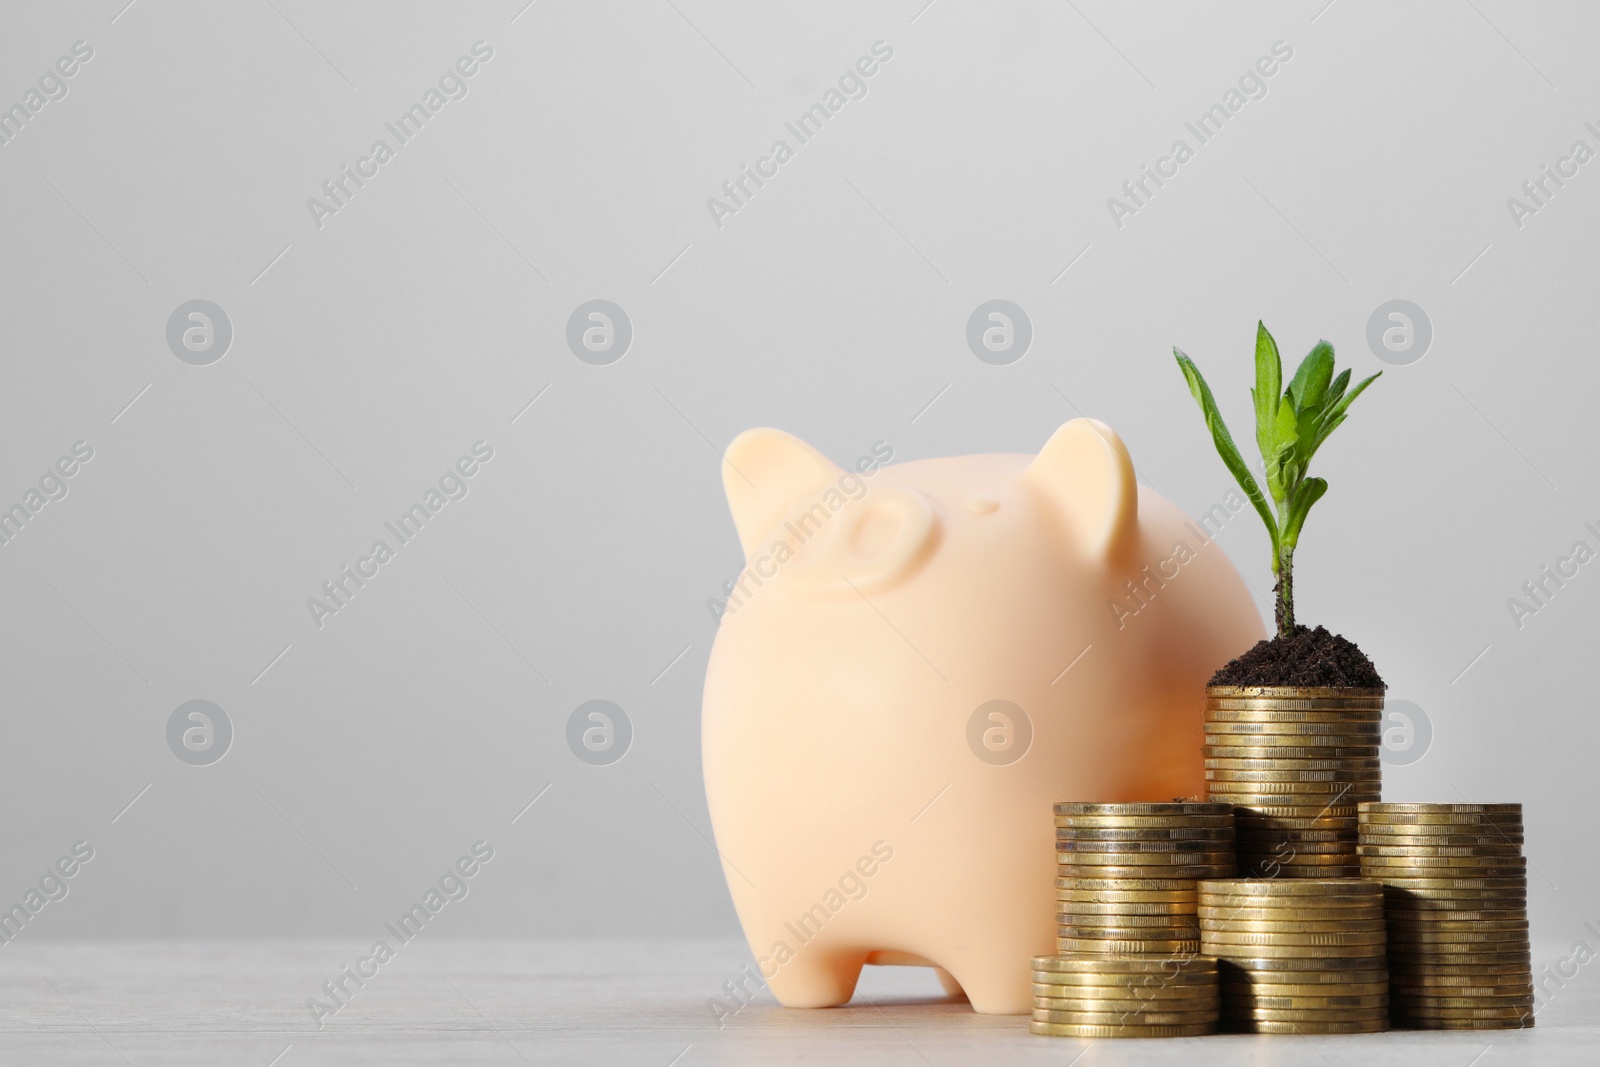 Photo of Stacks of coins with green seedling and piggy bank on white table against light grey background, space for text. Investment concept